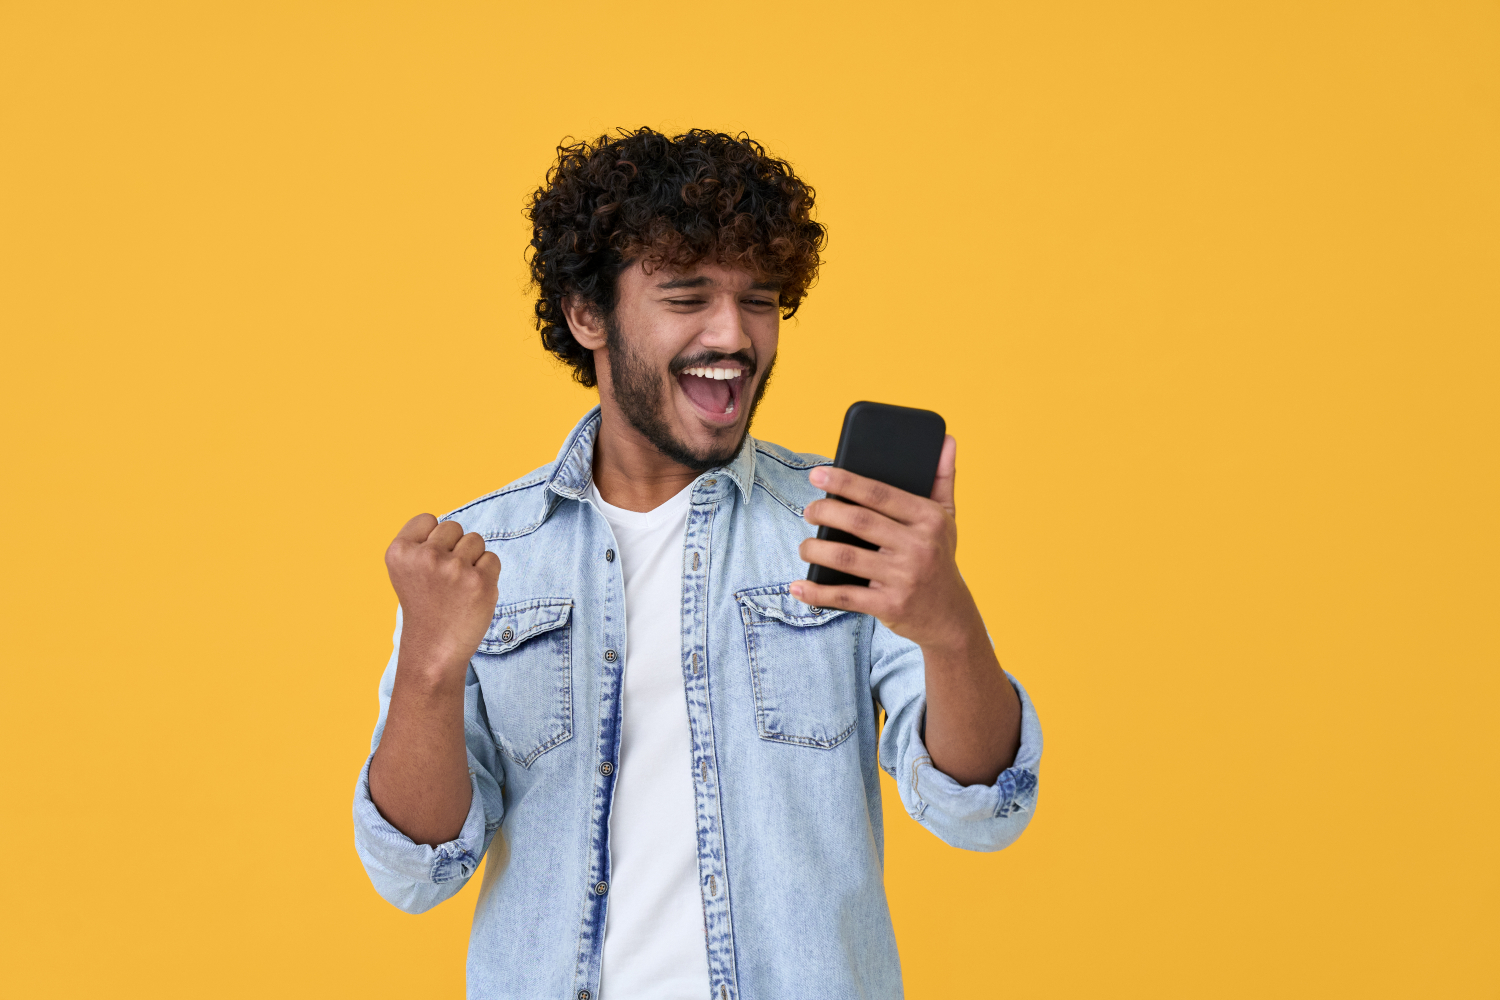 man cheering whilst holding a phone standing in front of a yellow background